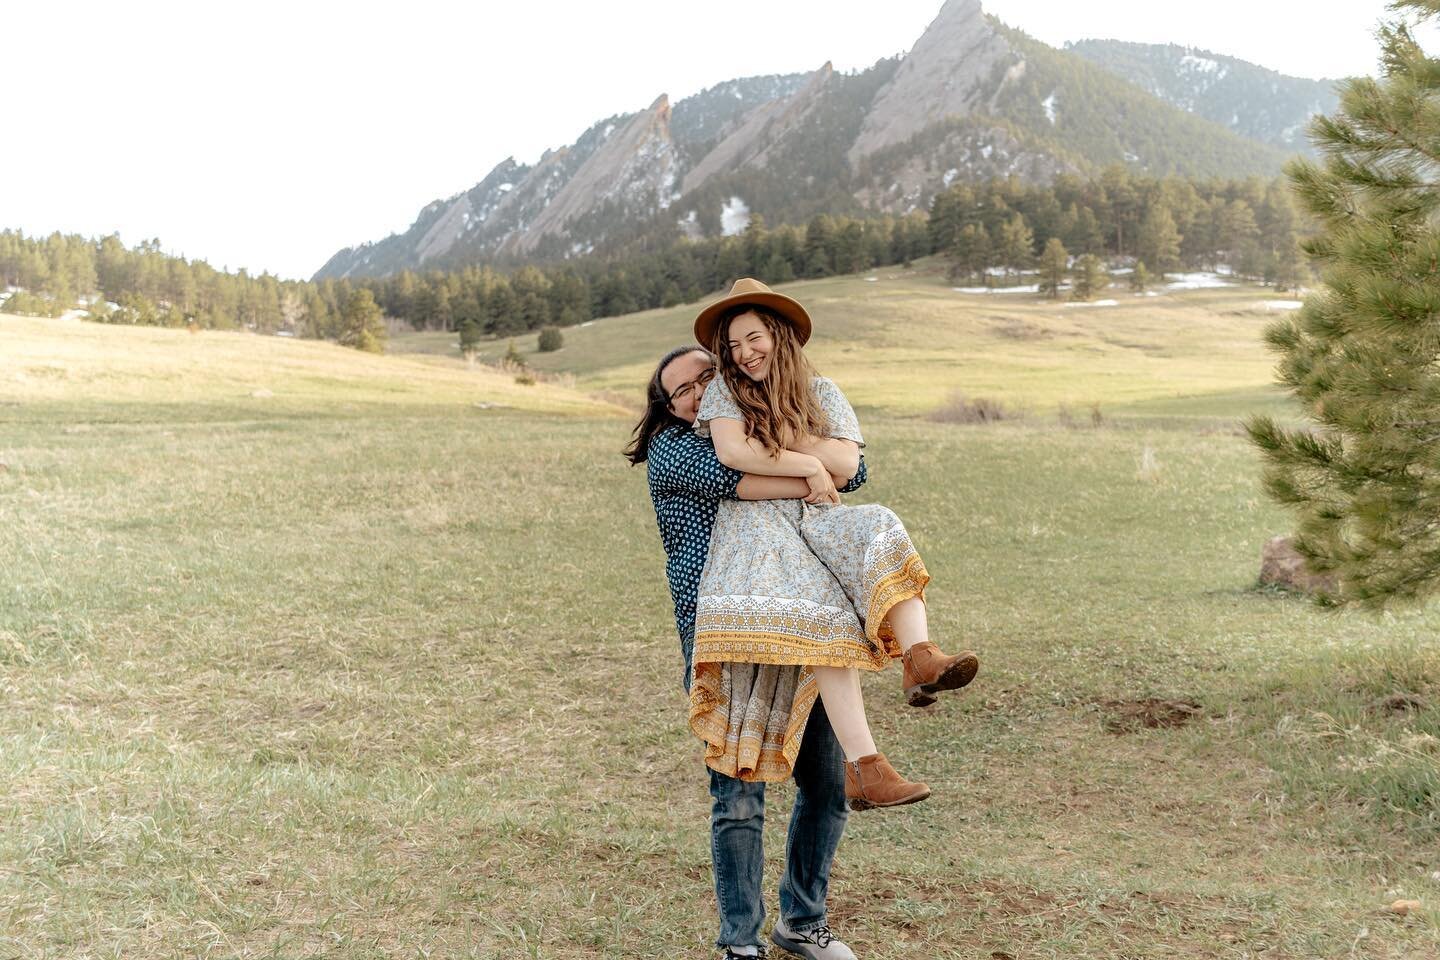 ||| Lindsay +Ahmed |||
Summer is slowly creeping up here in Colorado and I couldn&rsquo;t be happier, it was a very rough winter and I&rsquo;m so happy to finally see the light at the end of the tunnel, and to be able to capture candid moments for pe